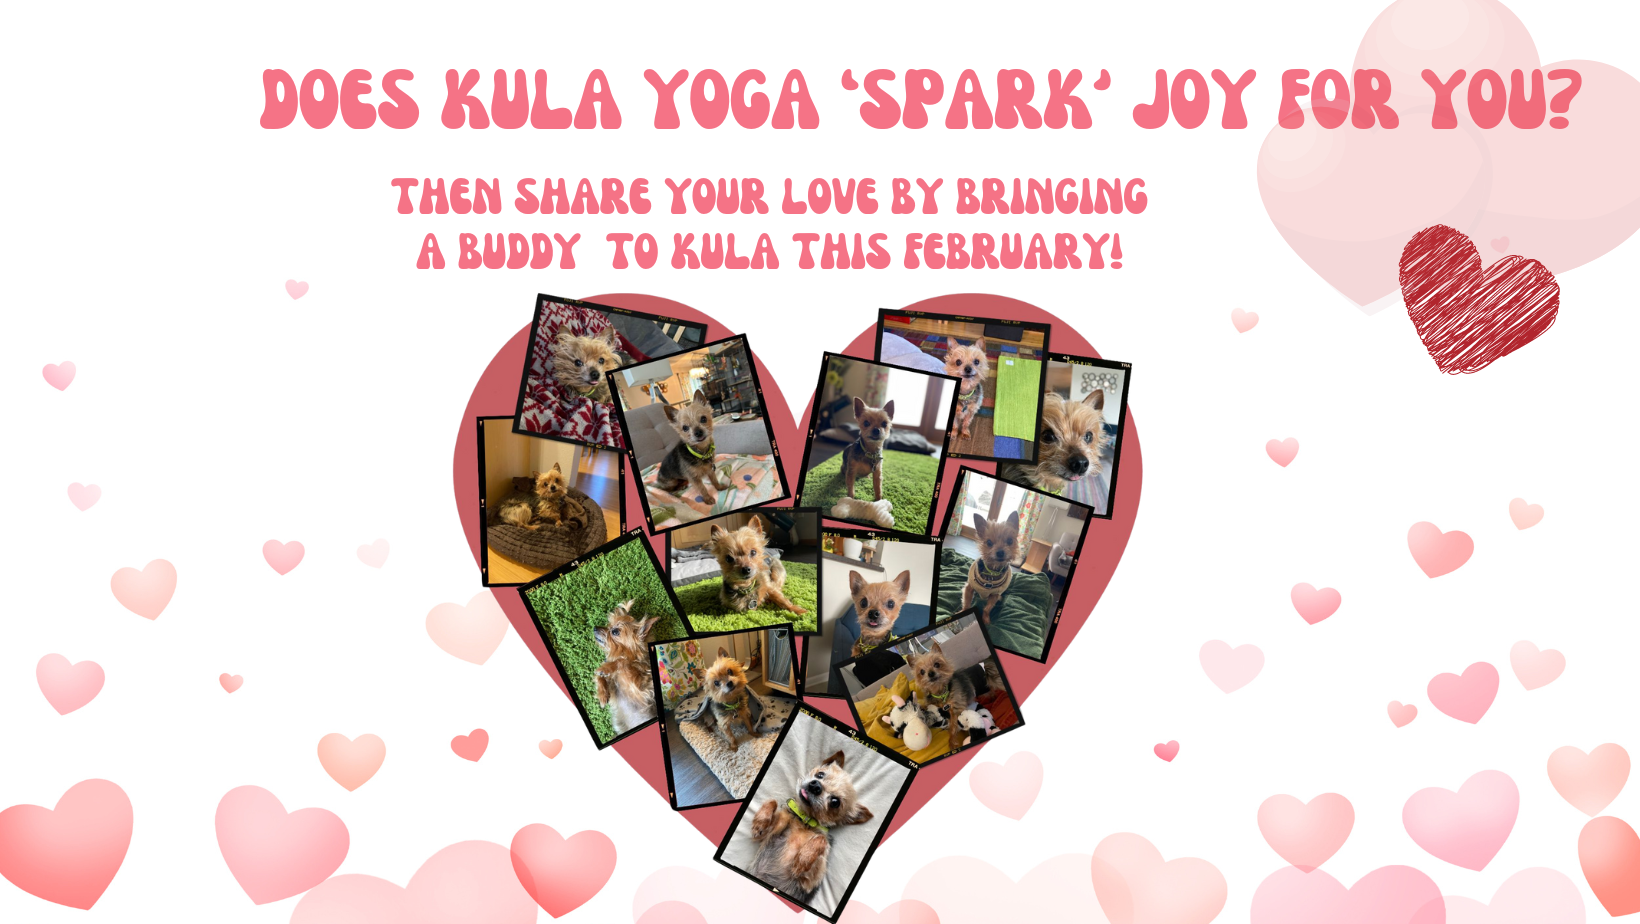 Share your love of Kula with a buddy (or 2) This February